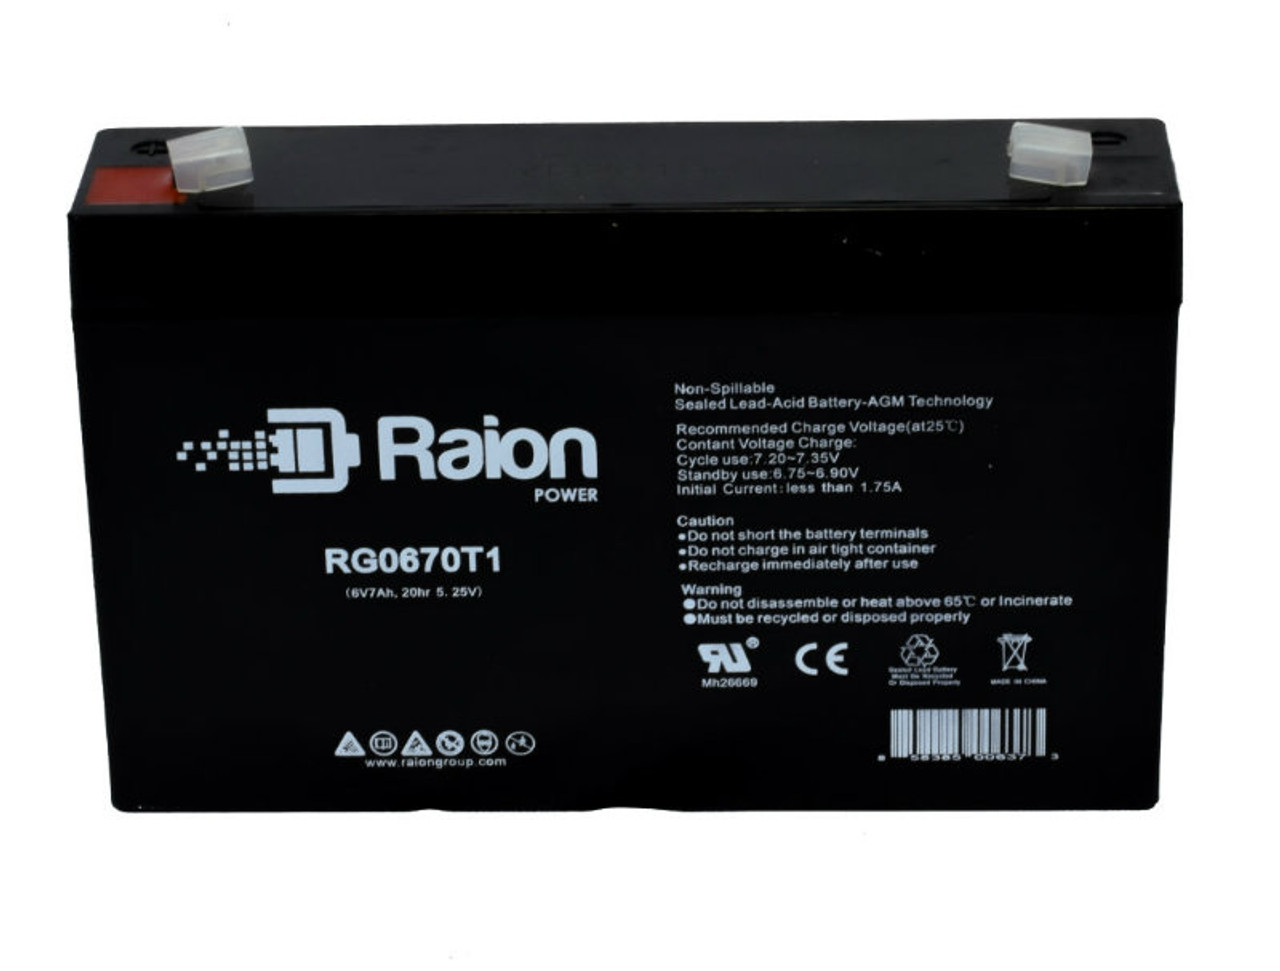 Raion Power RG0670T1 Replacement Battery Cartridge for Mule PM670